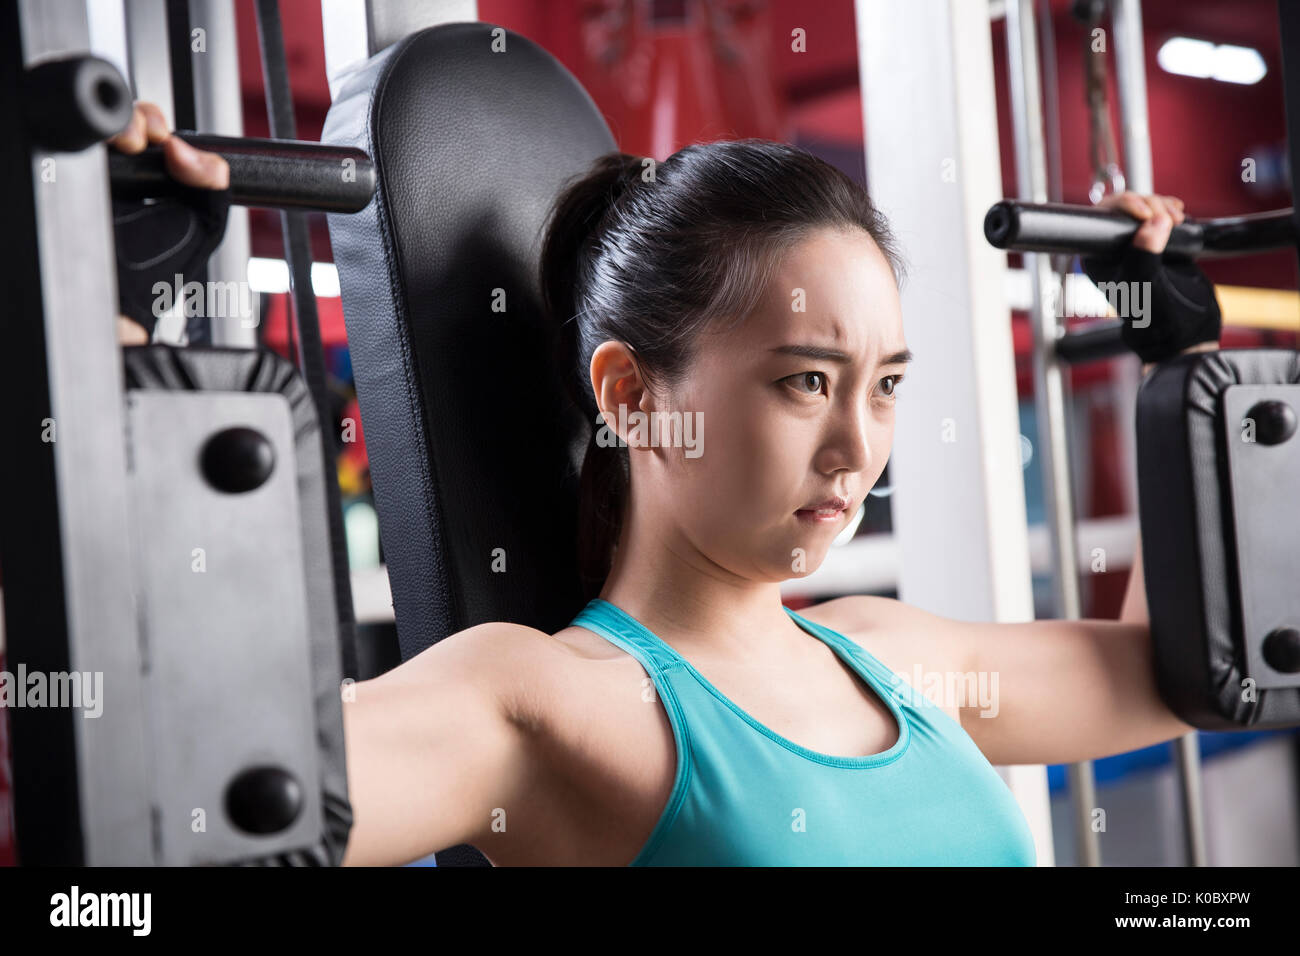 Side view portrait of young woman exercising at health club Stock Photo